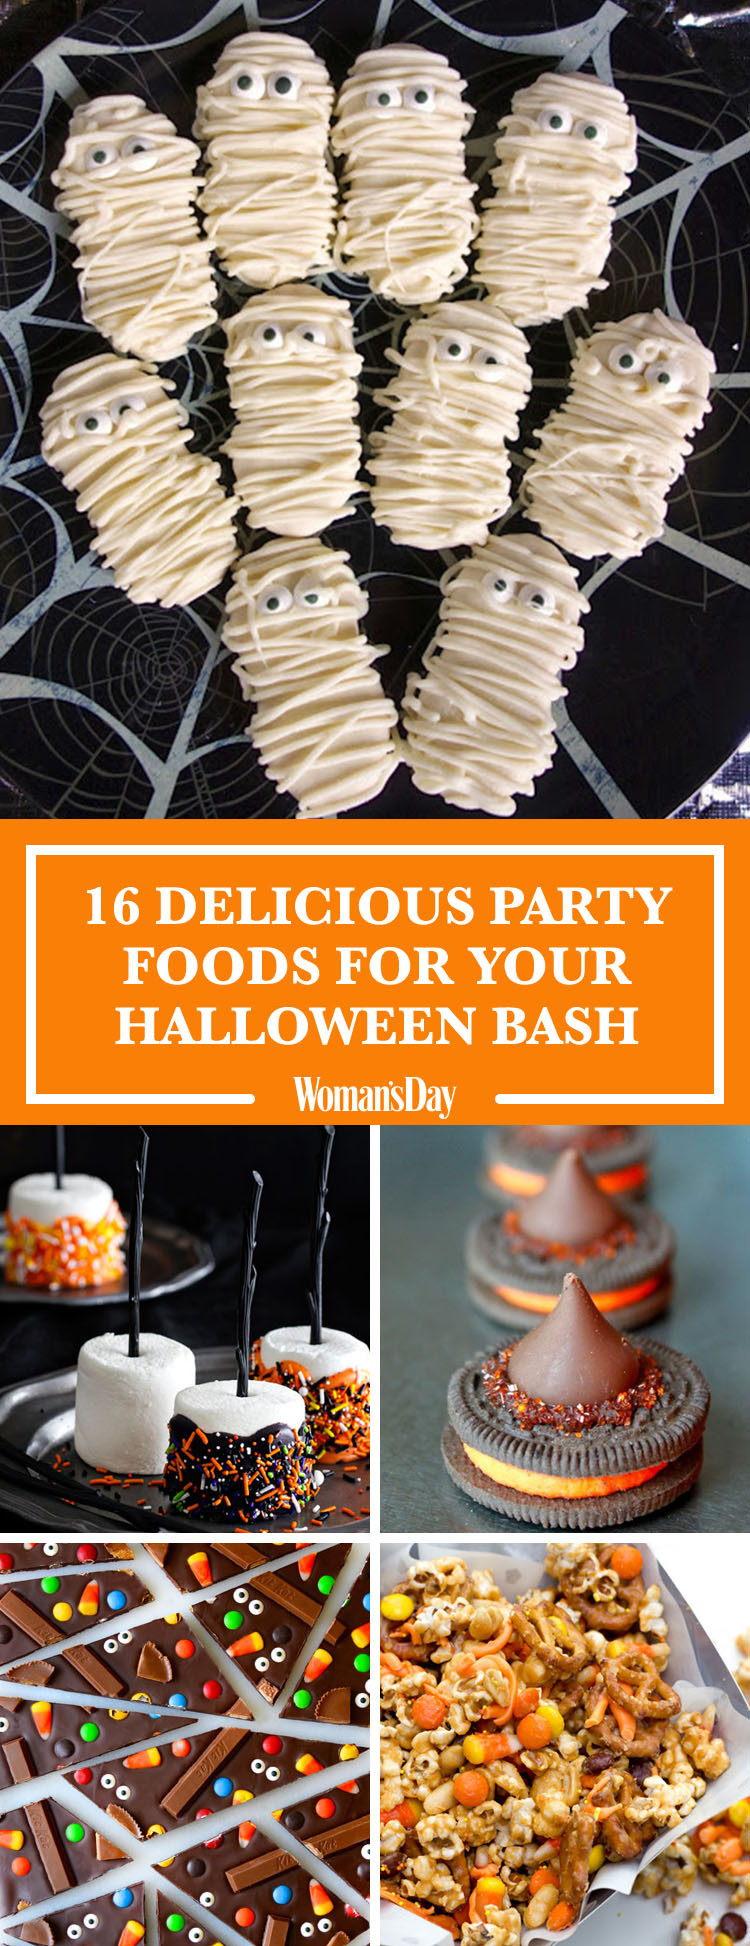 Food Ideas For Halloween Party
 22 Easy Halloween Party Food Ideas Cute Recipes for